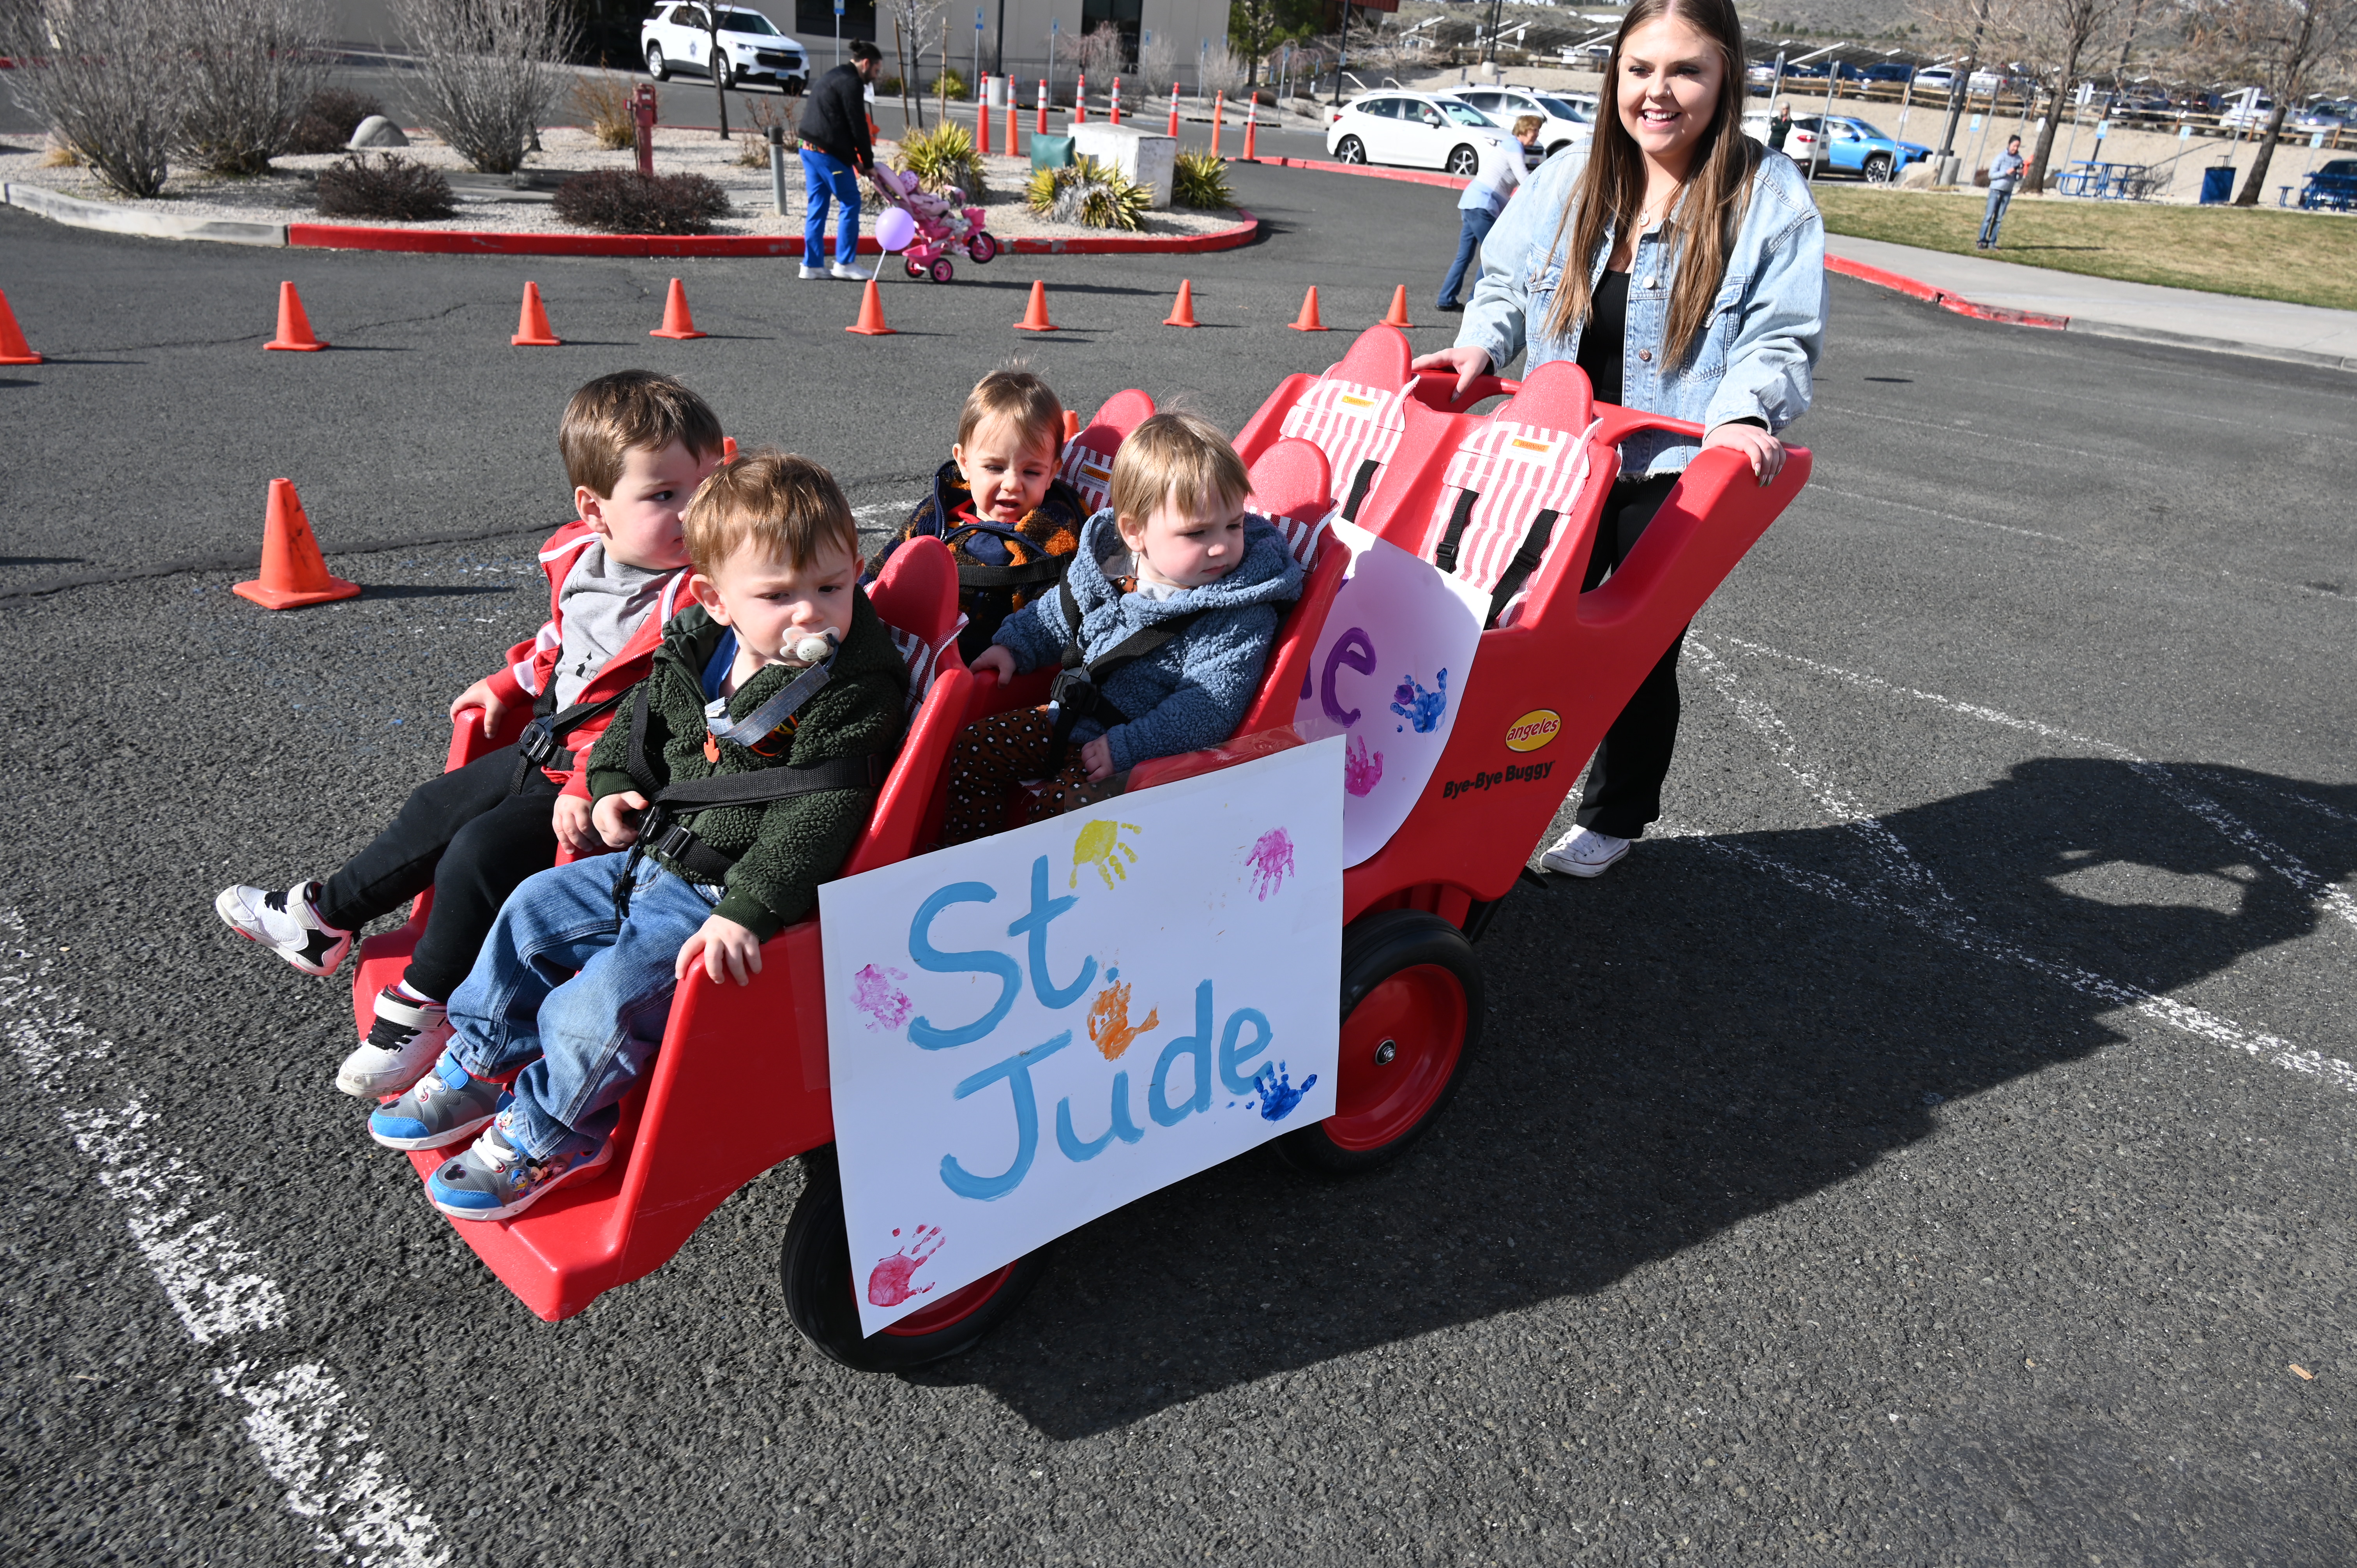 Children of all ages participated in the fundraiser for St. Jude